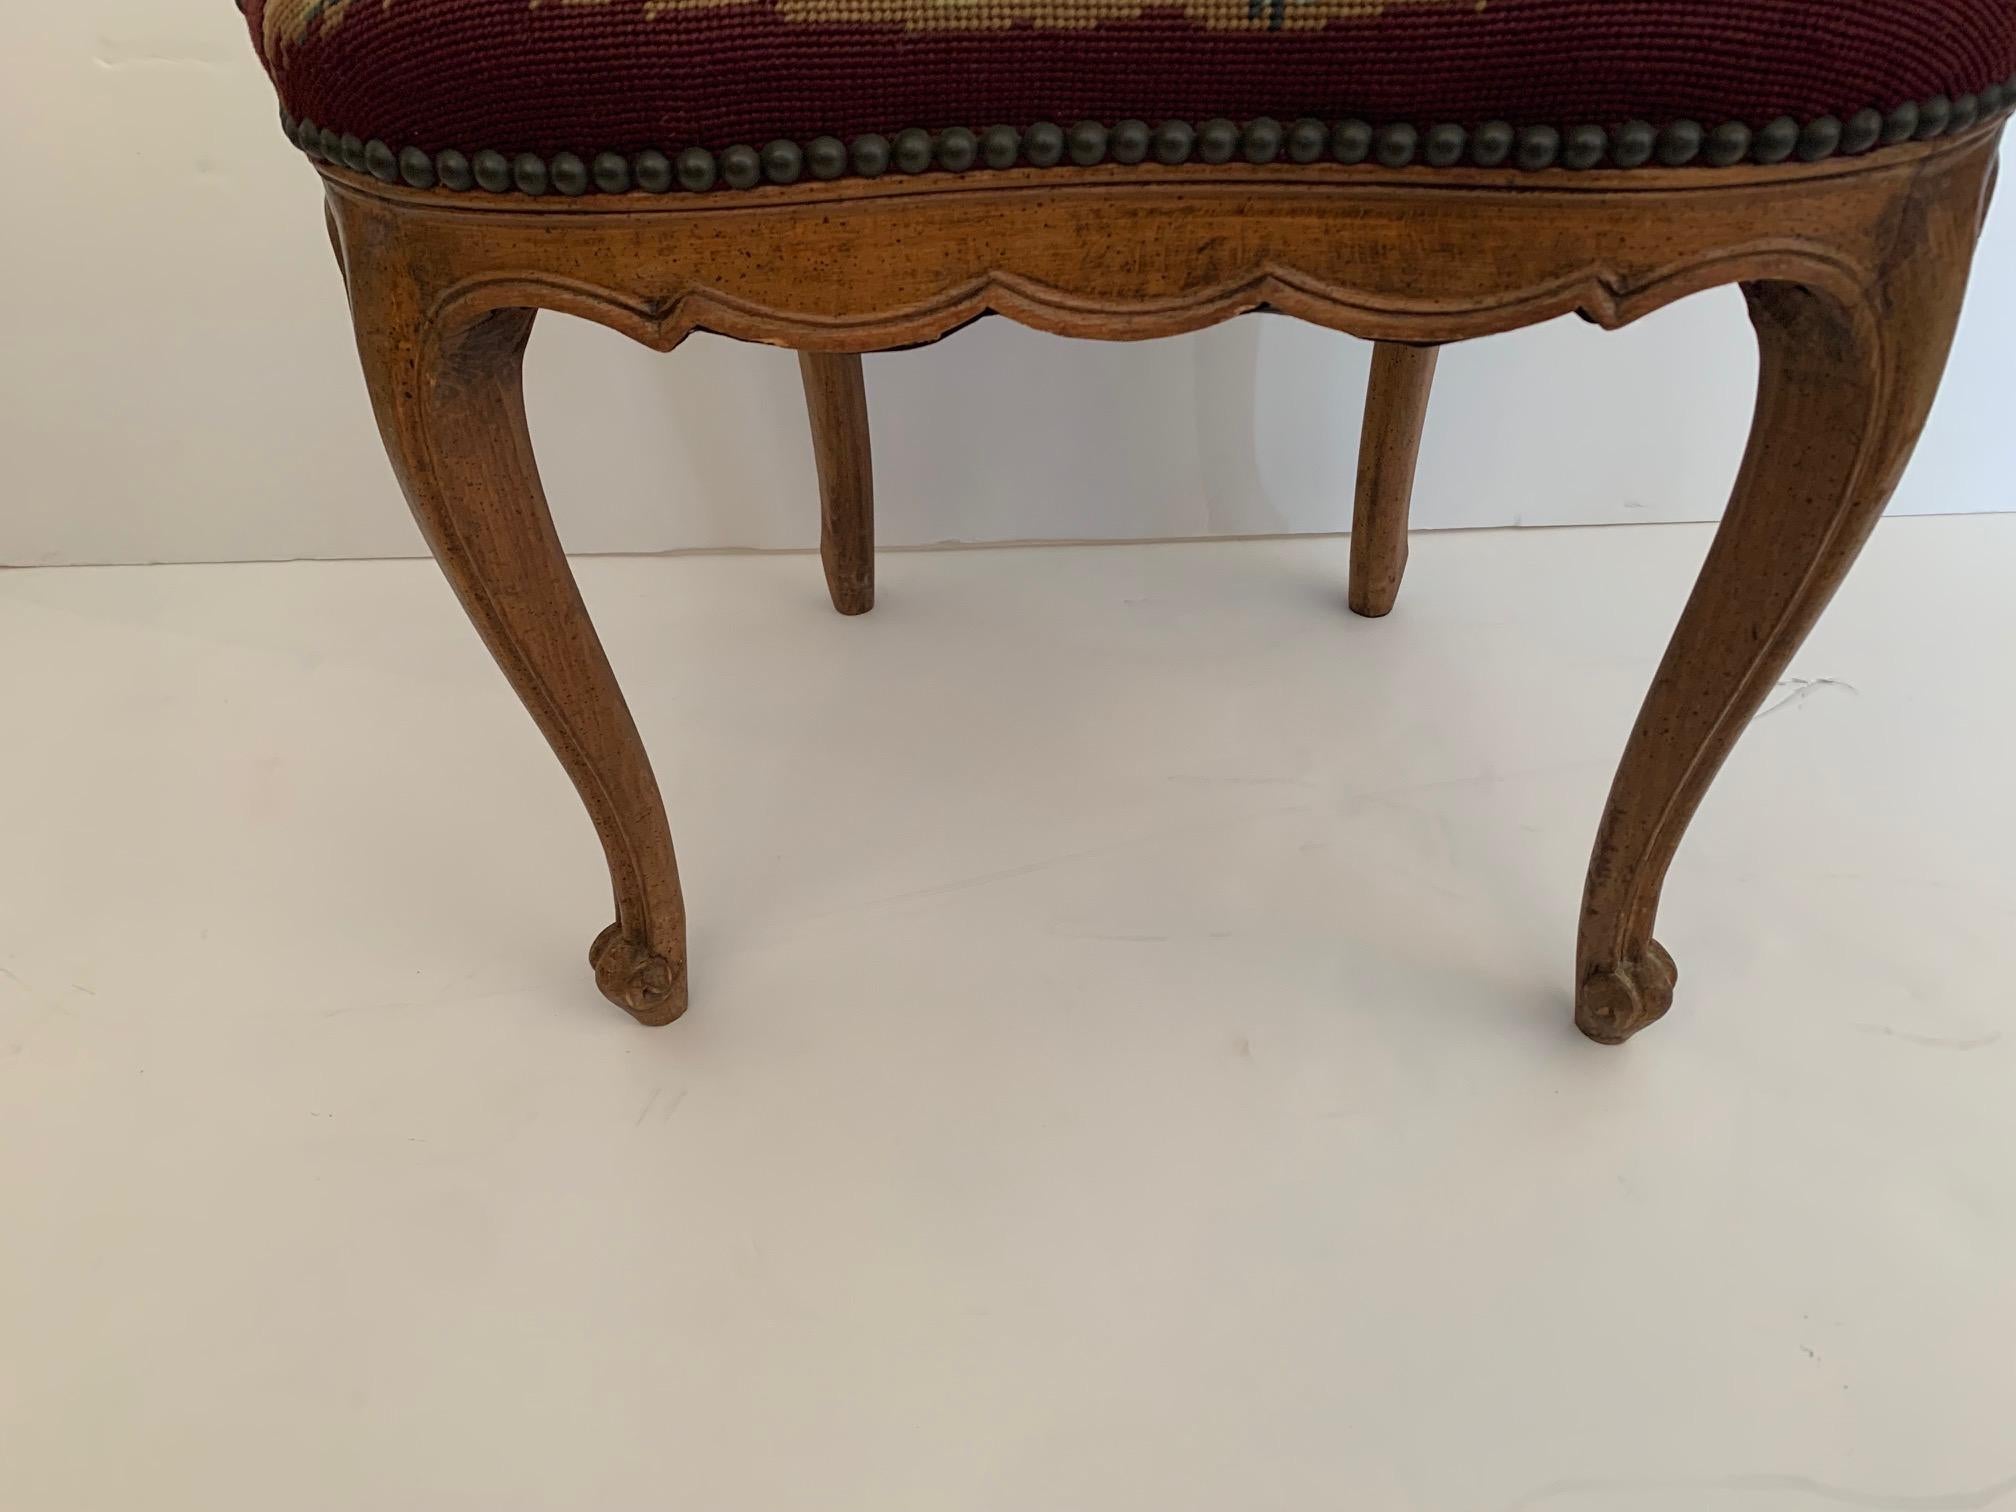 Curved Antique French Walnut Salon Chair with Lovely Needlepoint Seat For Sale 1